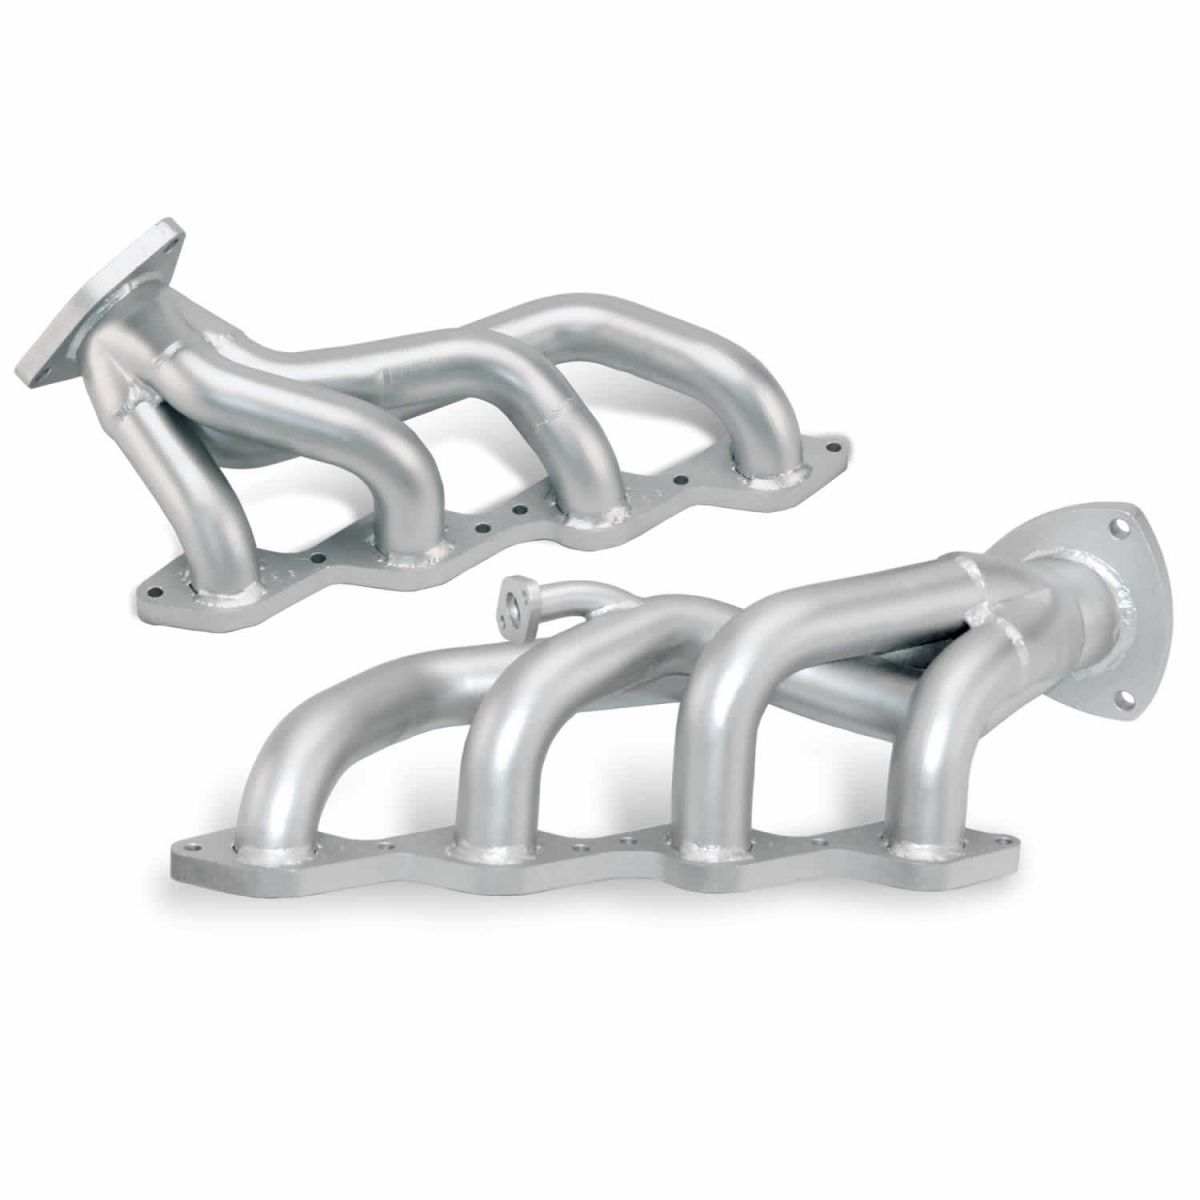 Banks Power - Banks Power Torque Tube Exhaust Header System 99-01 Chevy 4.8-5.3L Non-A/I (no air injection)